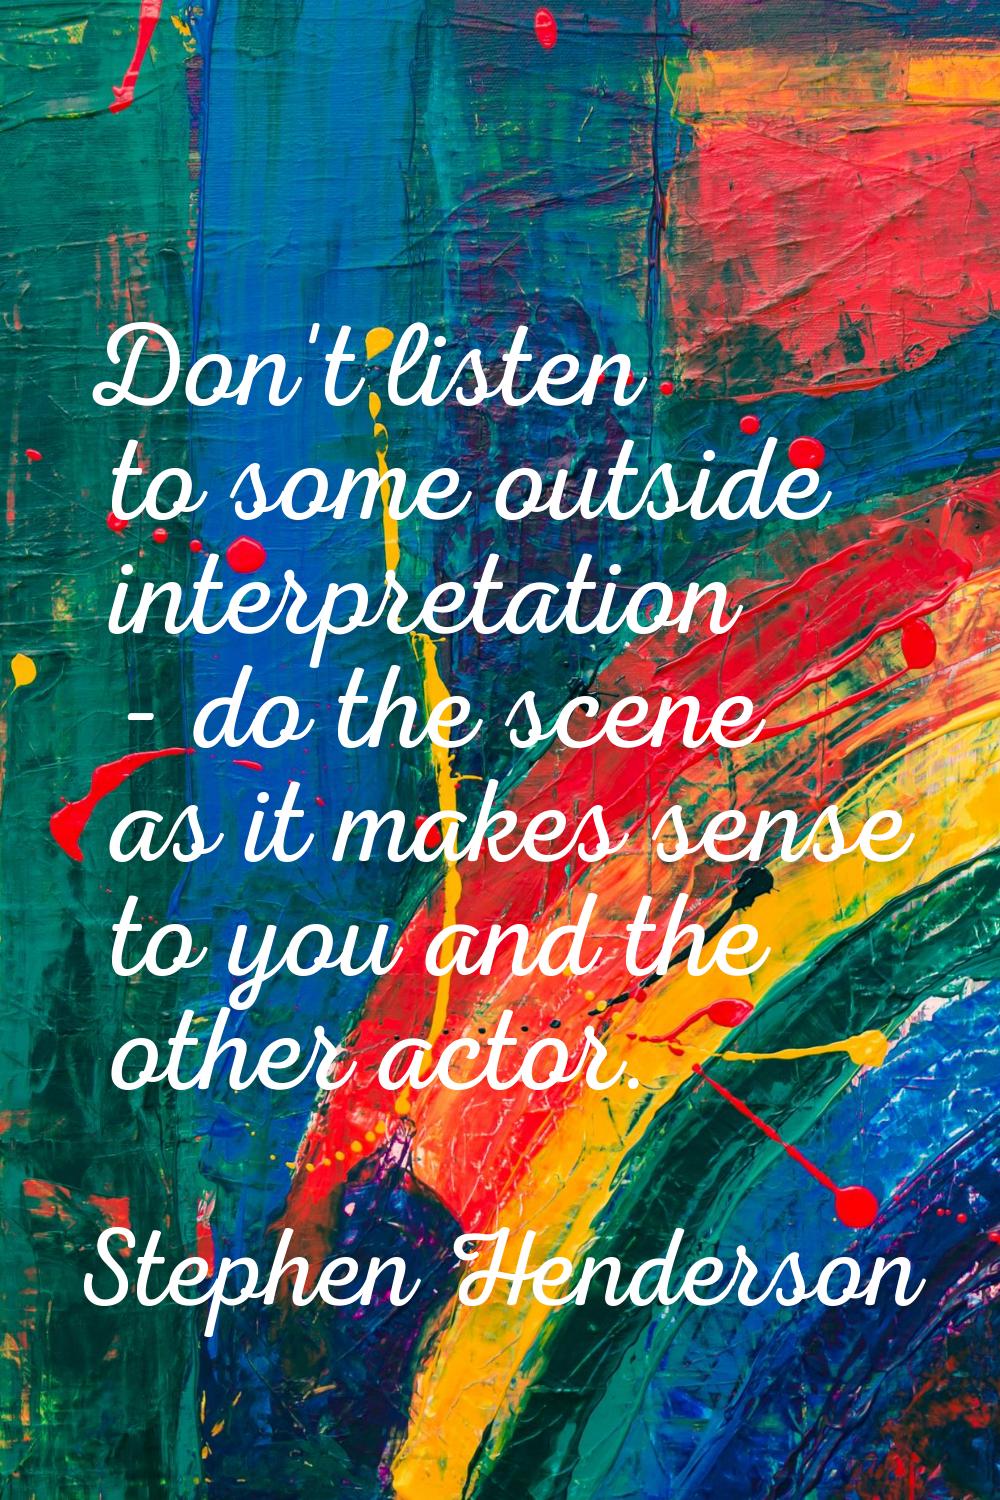 Don't listen to some outside interpretation - do the scene as it makes sense to you and the other a